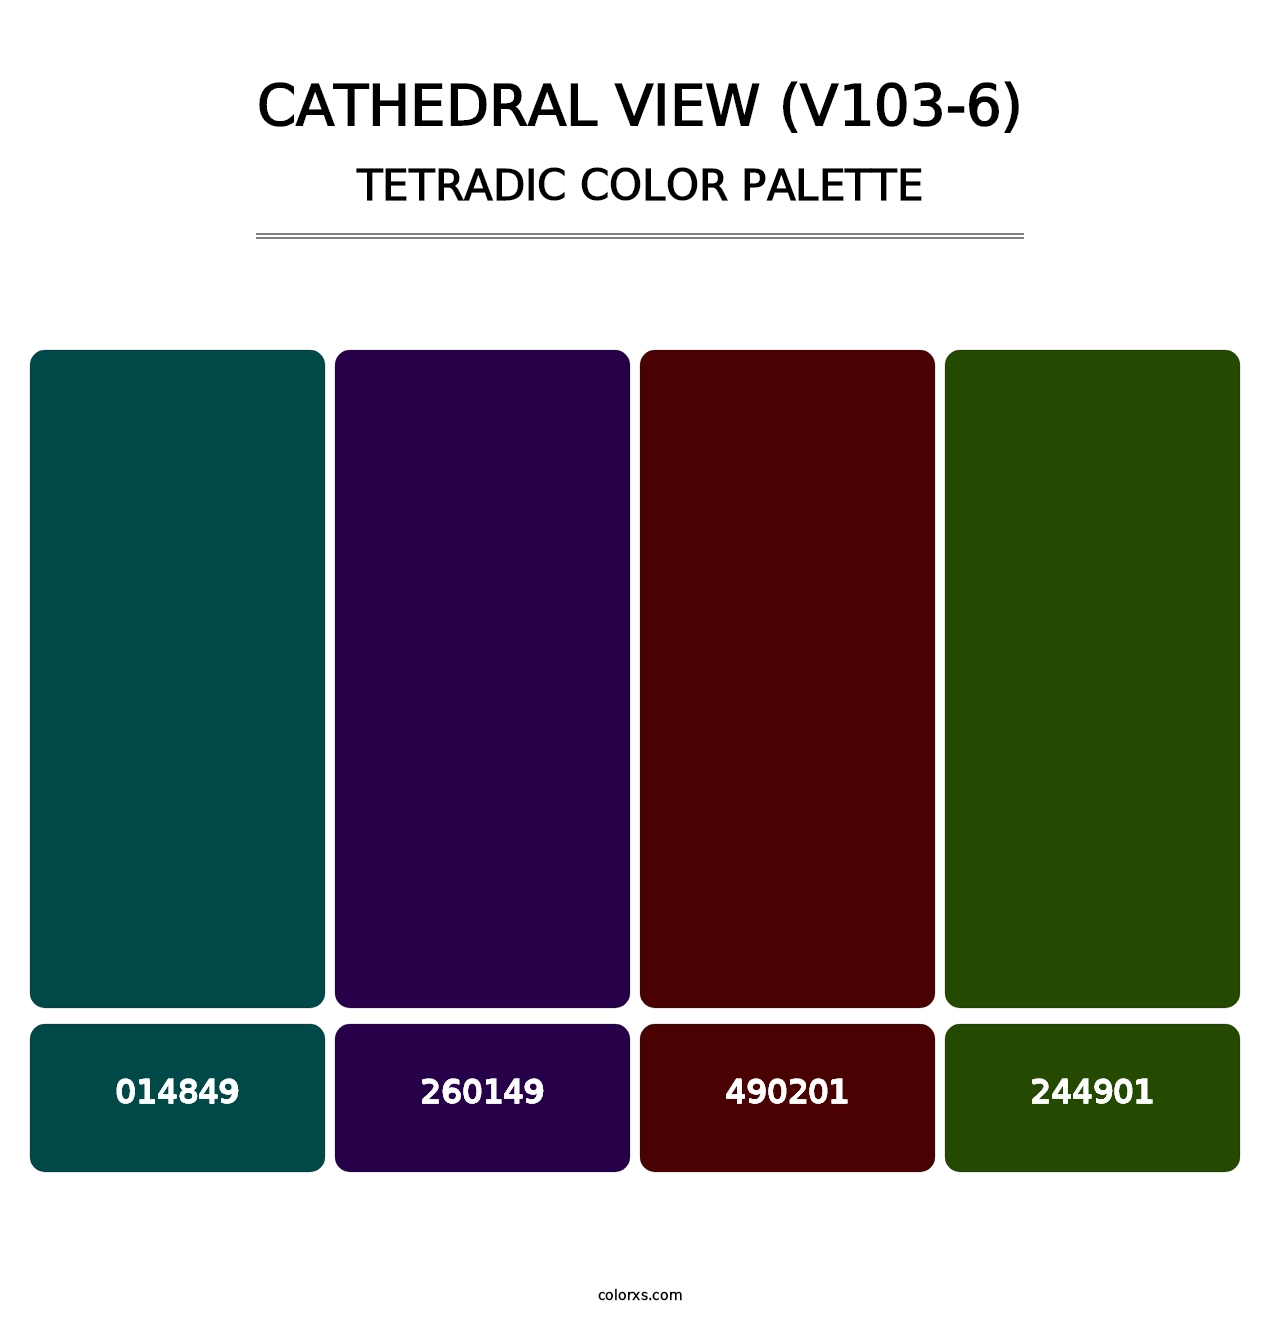 Cathedral View (V103-6) - Tetradic Color Palette